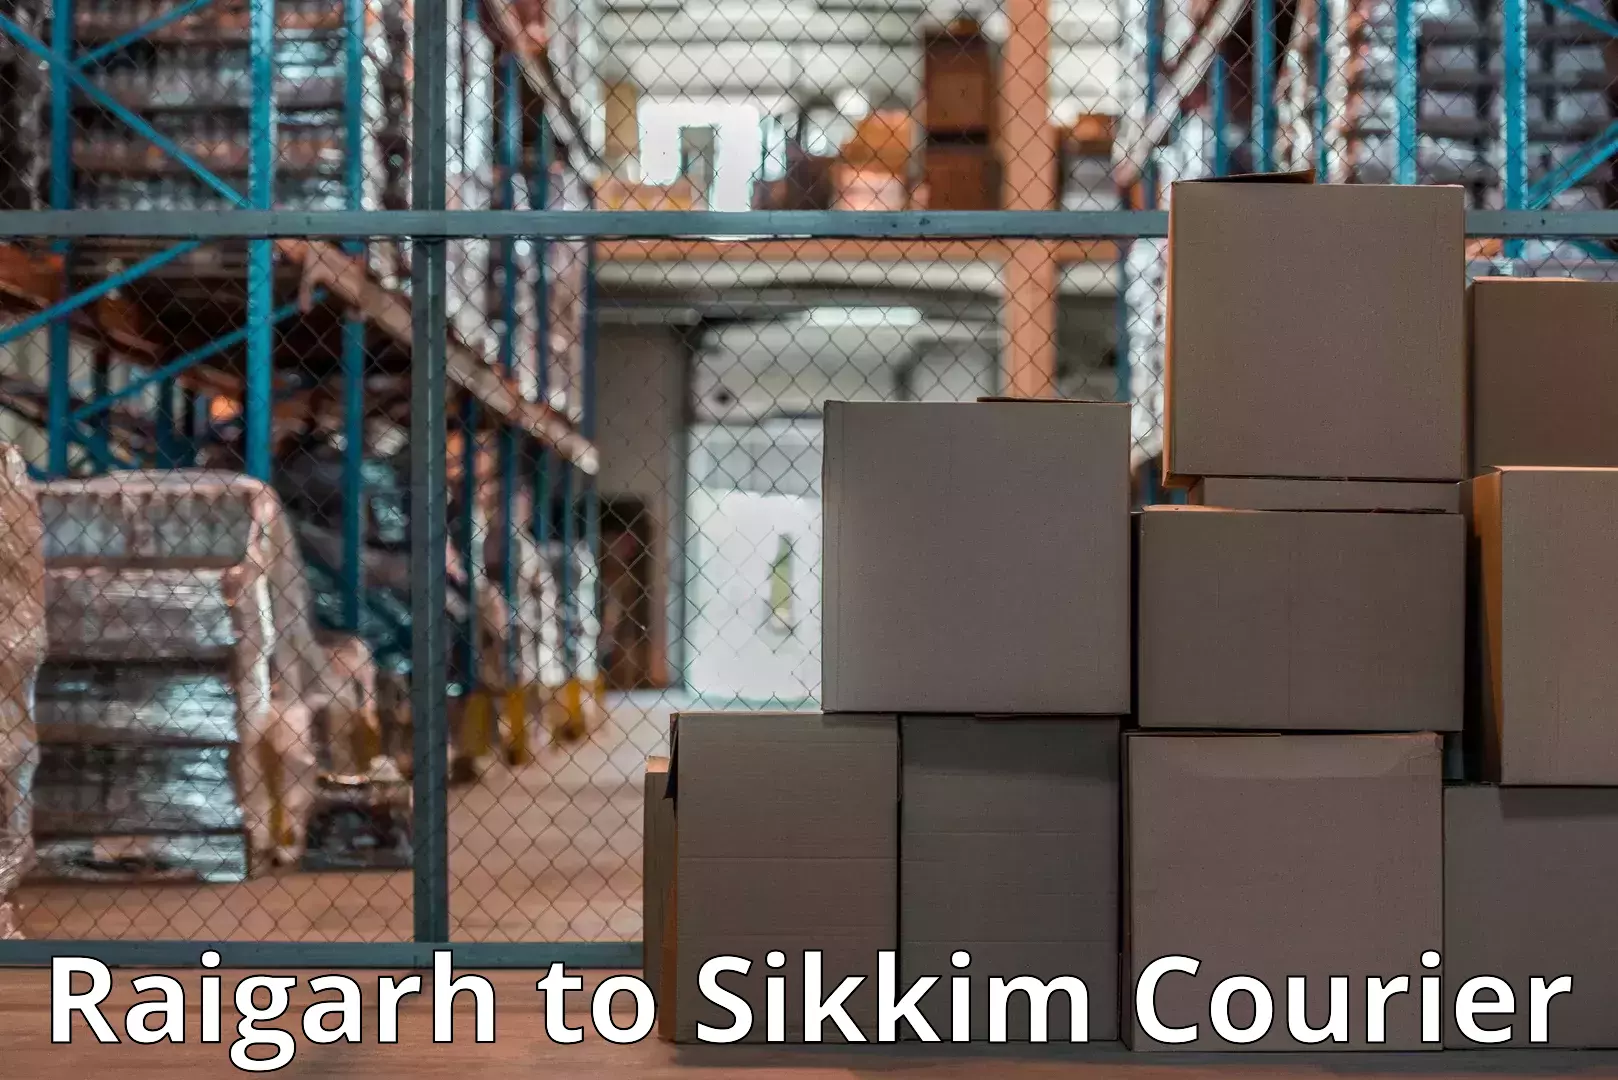 Professional moving company Raigarh to Sikkim